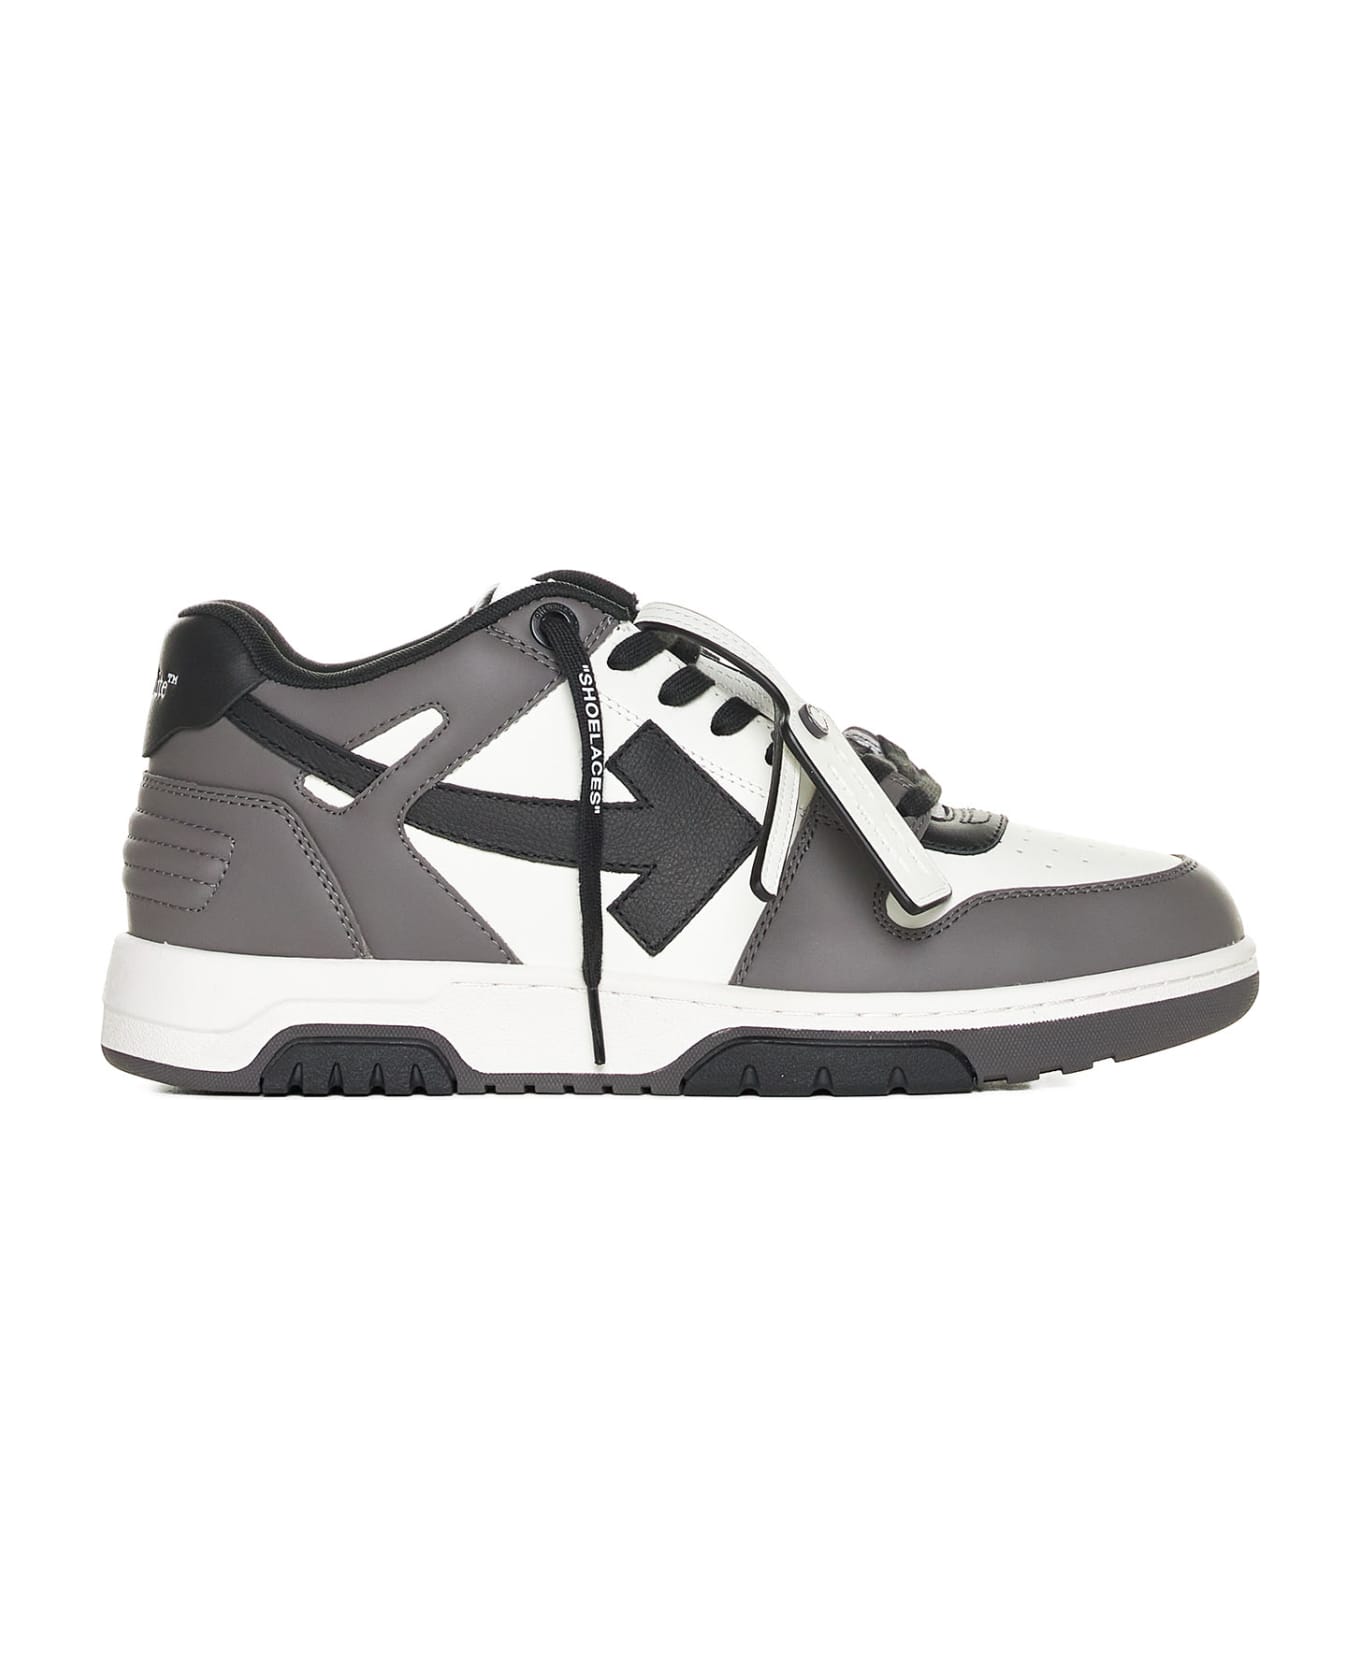 Off-White Out Of Office Low Top Sneakers - Dark grey black